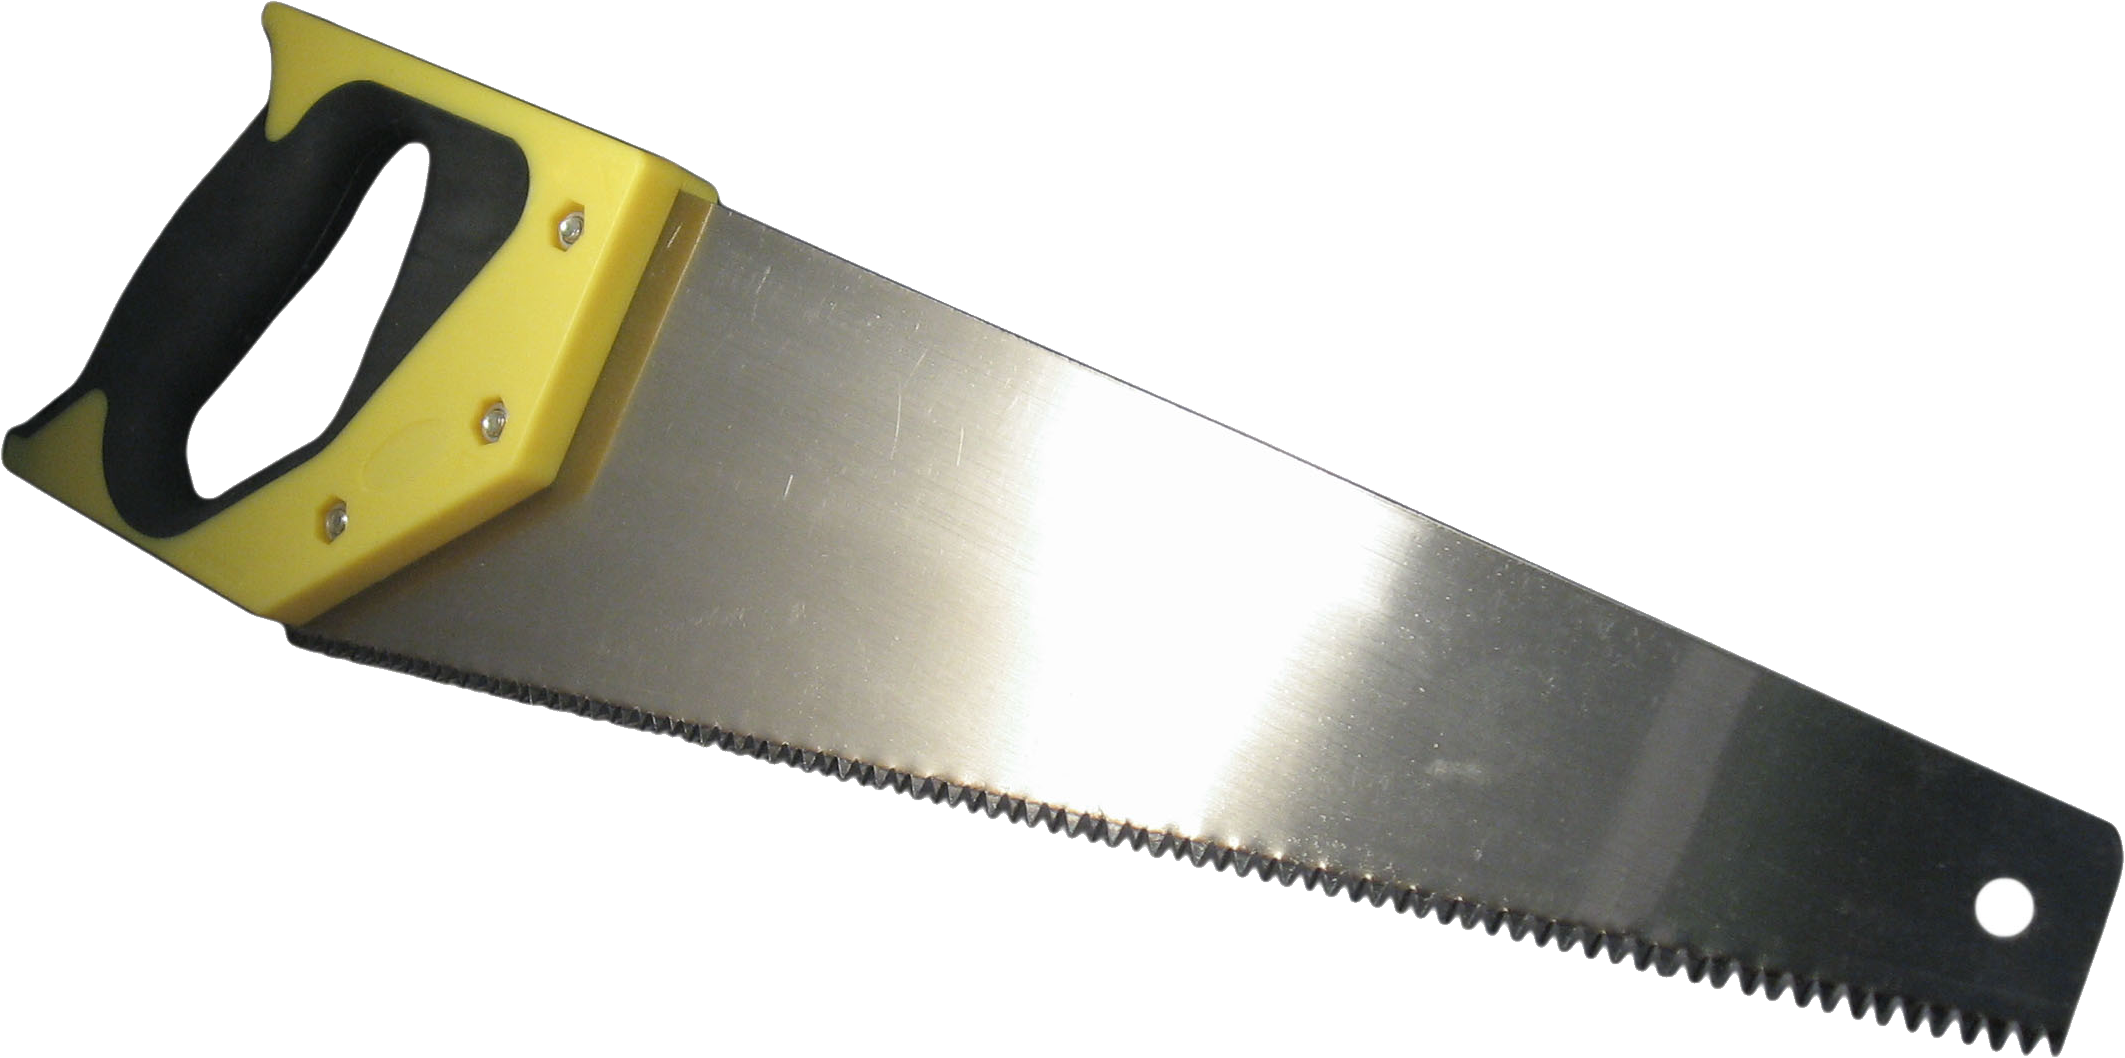 Hand saw PNG images Download 